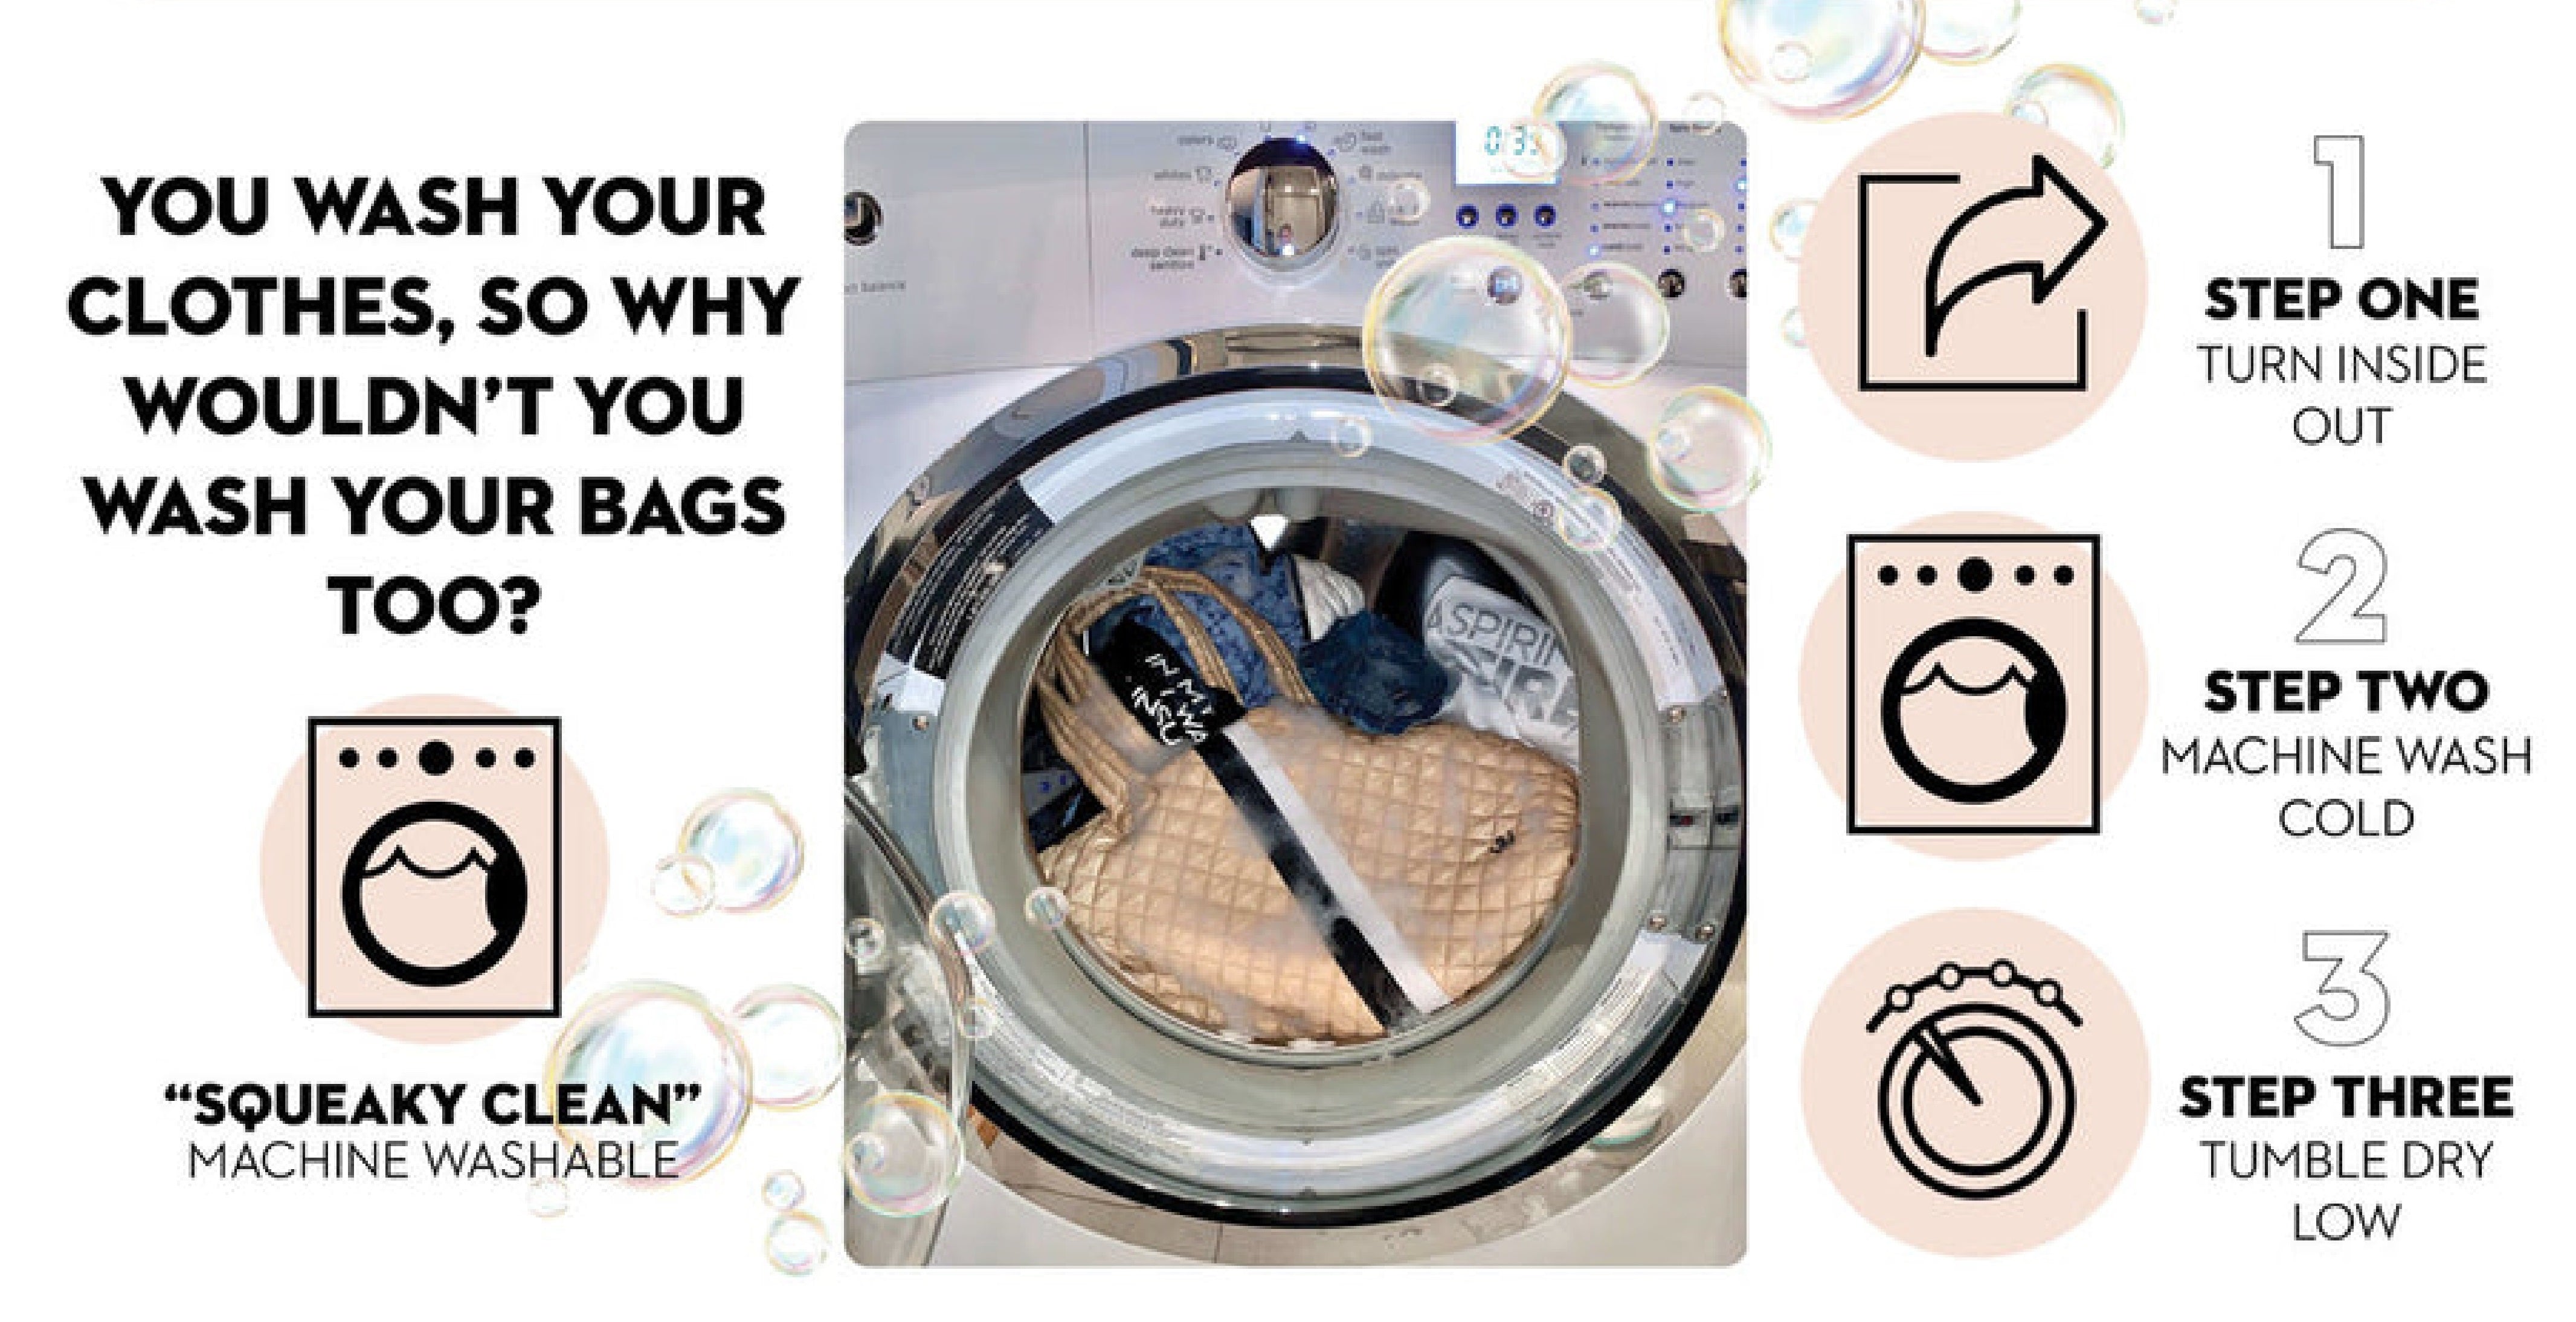 You wash your clothes, so why wouldn't you wash your bags too?  Squeaky Clean, Machine Washable, Step 1, Turn inside out, Step 2, Machine Wash Cold, Step 3, Tumble Dry Low